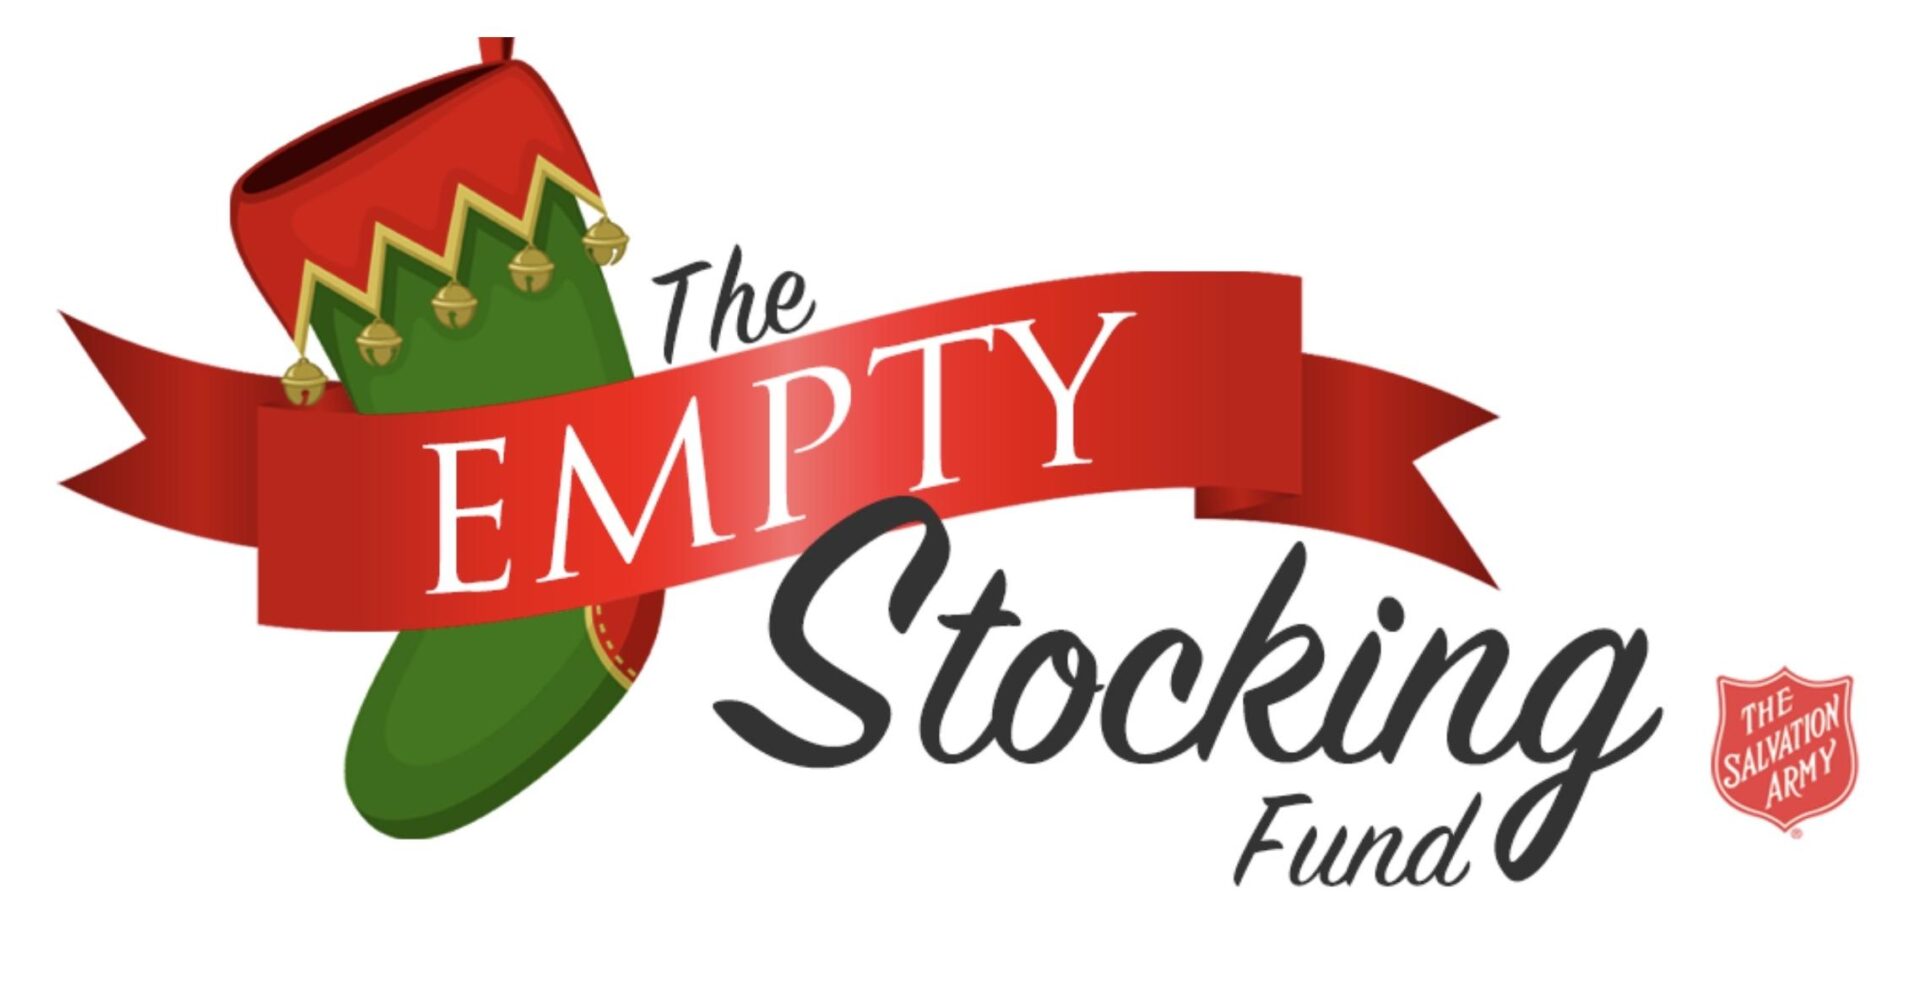 A logo for the empty stocking fund